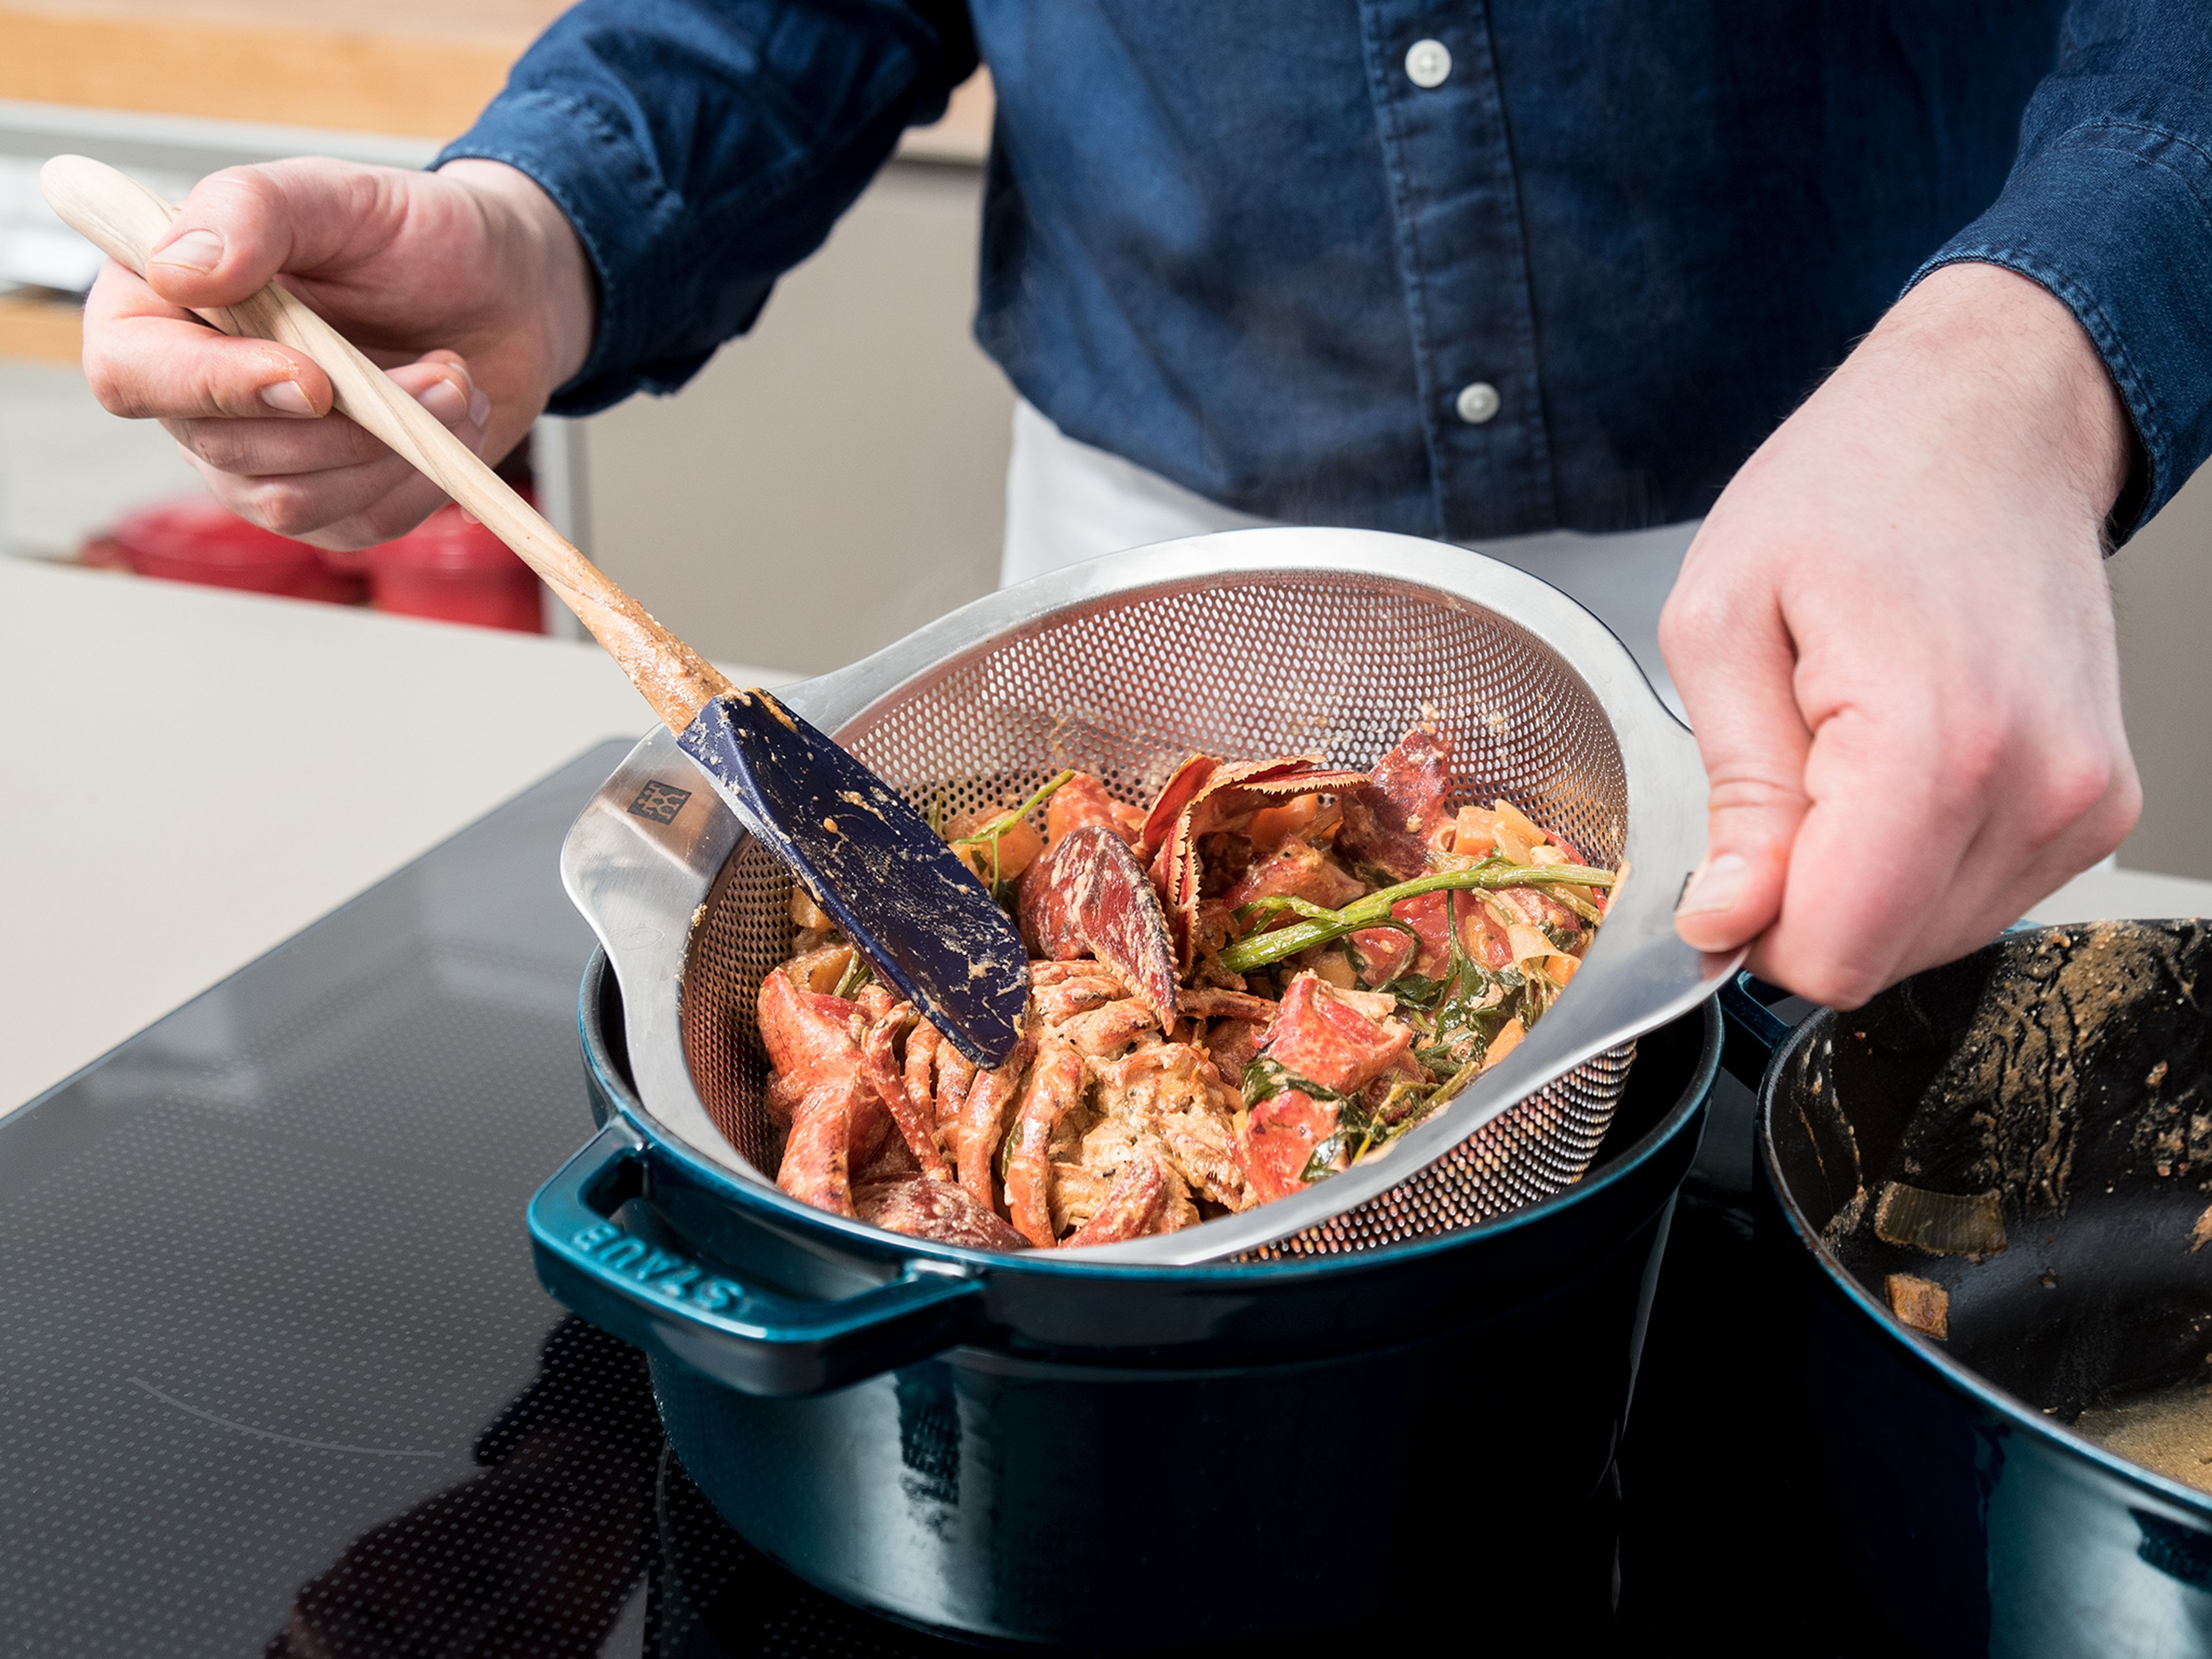 Remove the lobster-vegetable mixture from the heat and strain through a sieve into a clean pot. Remove as much liquid as possible and discard solids. Set pot over low heat and reduce into a thick sauce, whisking occasionally.